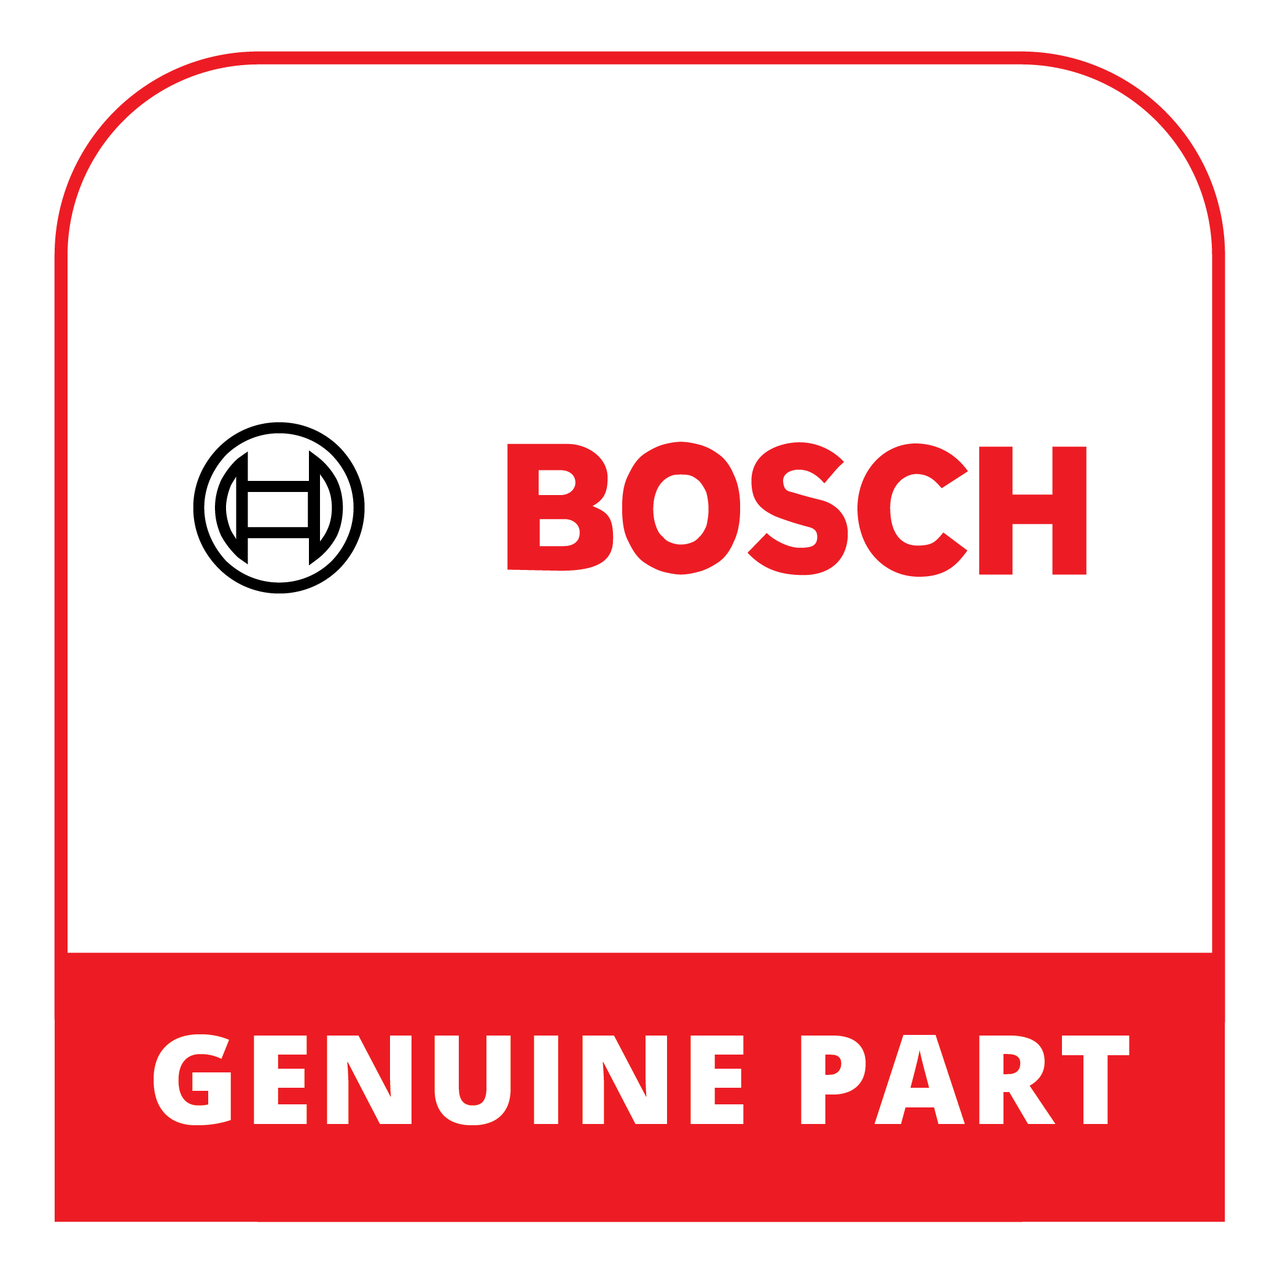 Bosch (Thermador) 11025118 - Holder - Genuine Bosch (Thermador) Part